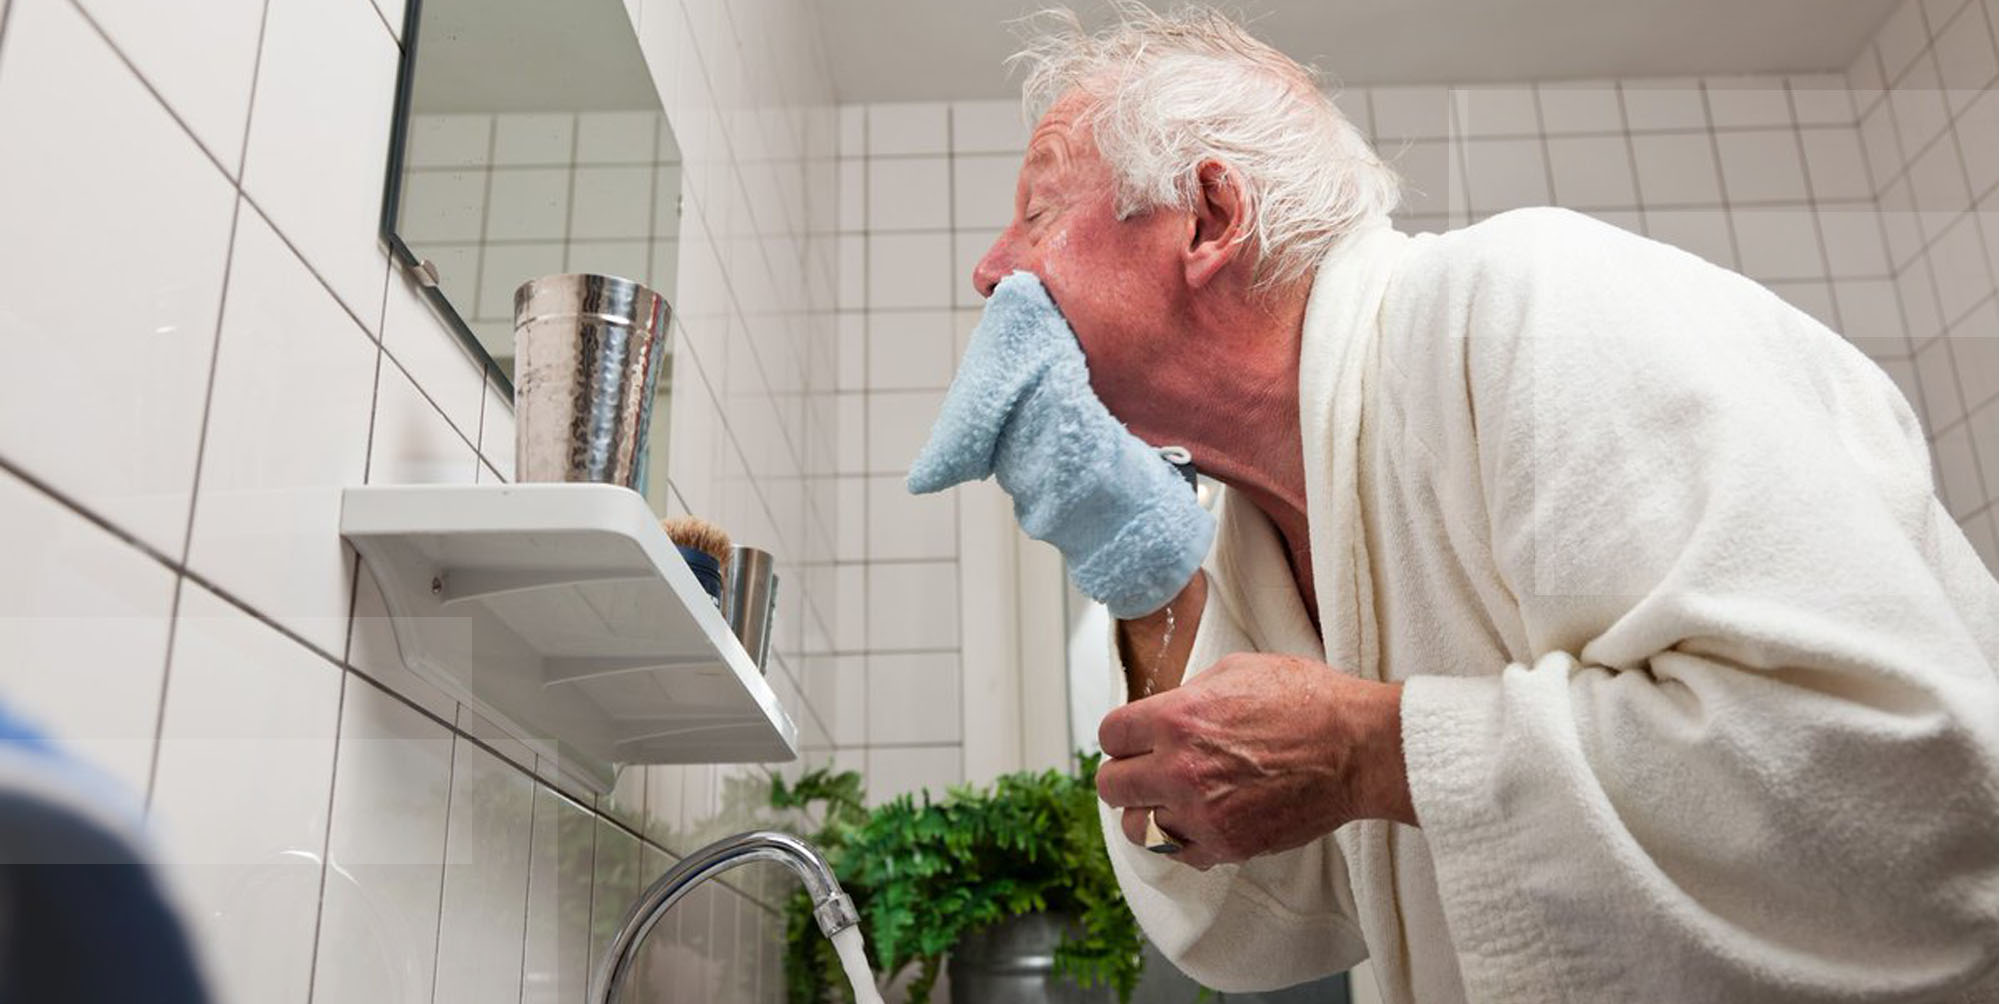 Personal hygiene old man cleaning face featured image